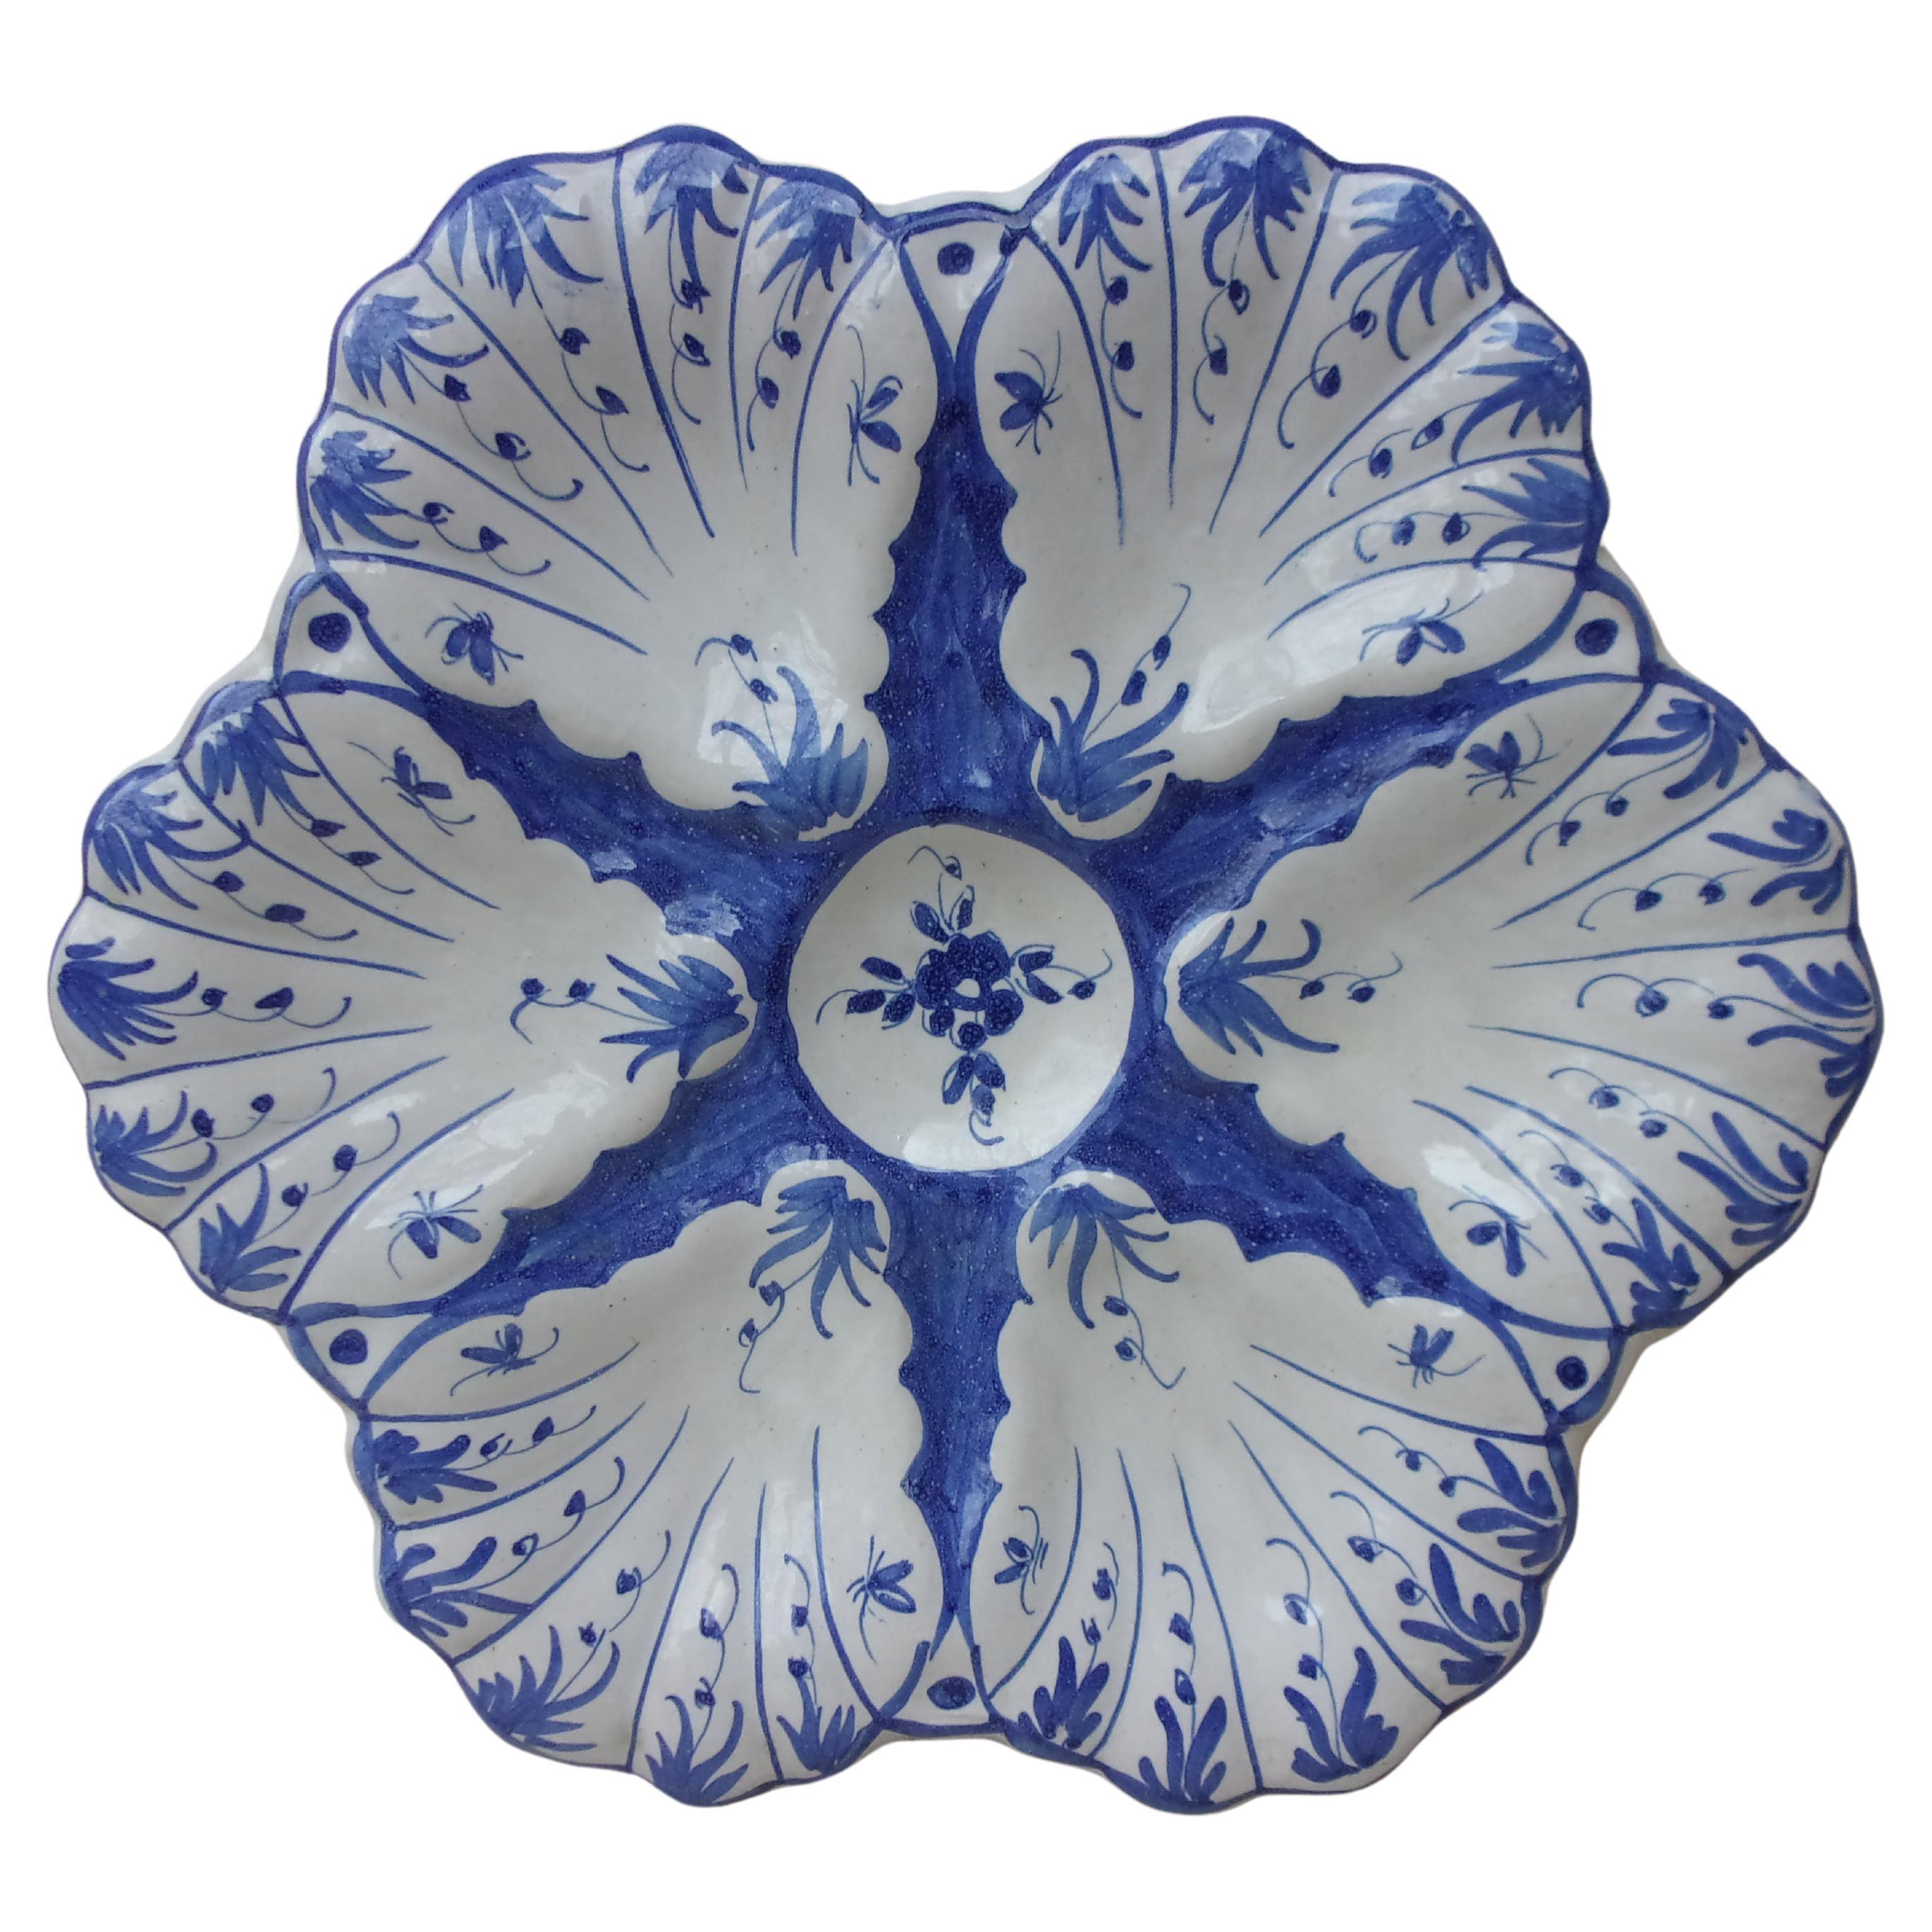 French Blue and White Faience Oyster Plate Moustiers Style, circa 1940